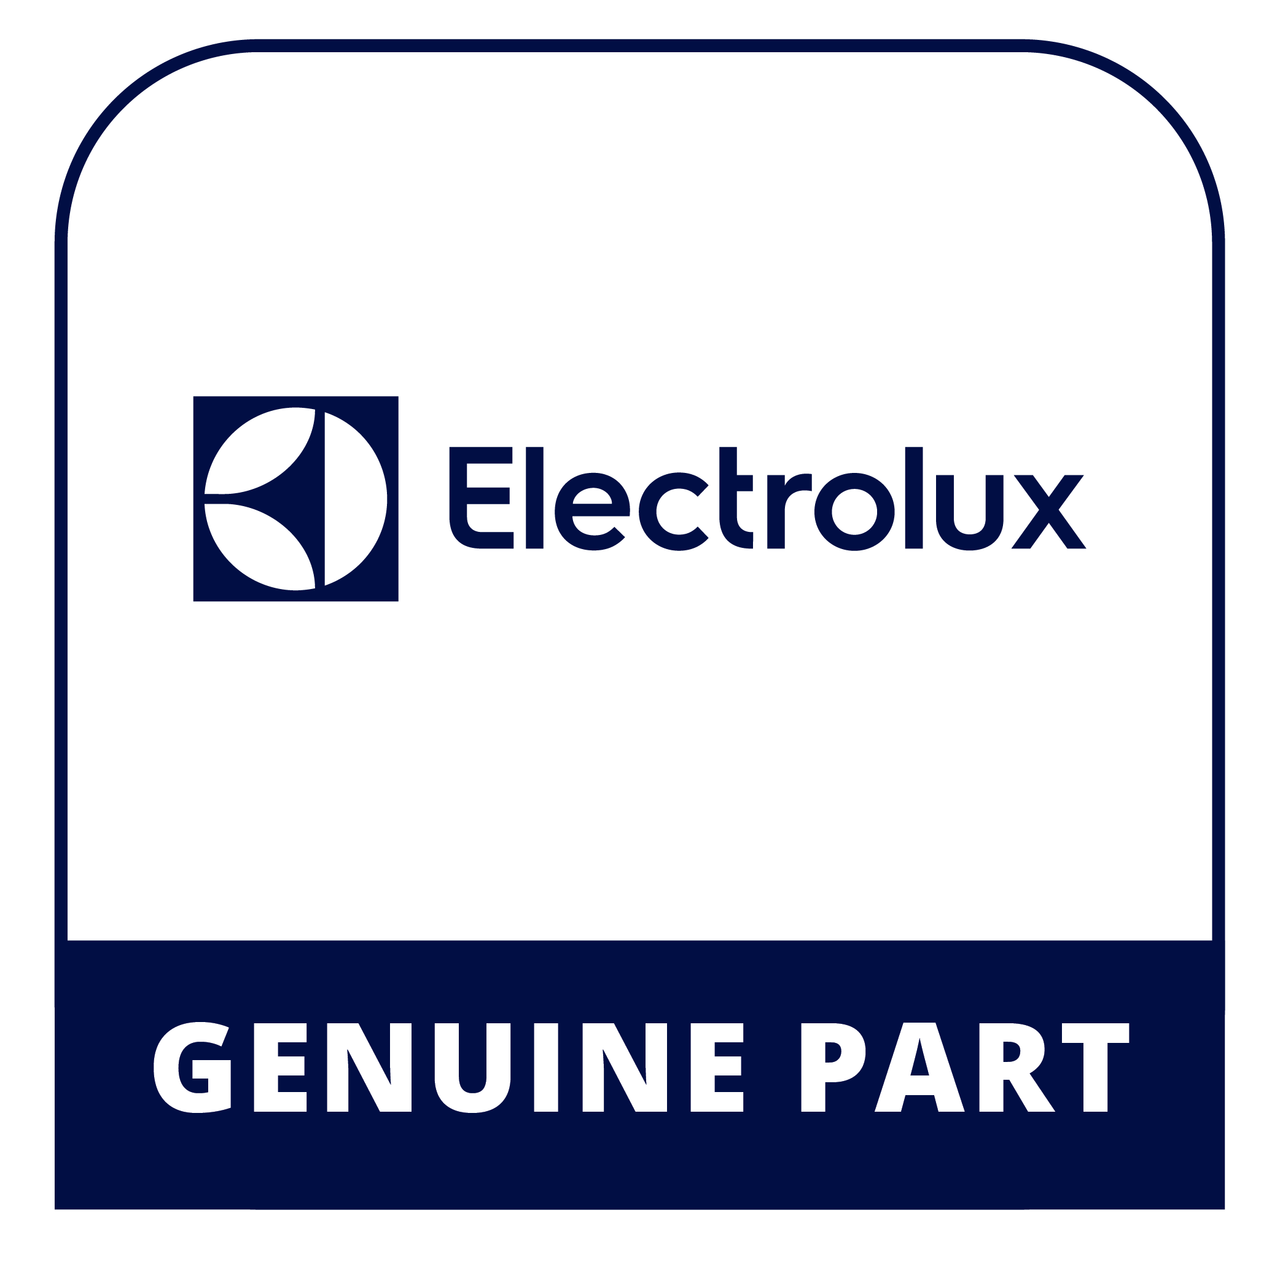 Frigidaire - Electrolux 316901109 Owners Manual - Genuine Electrolux Part